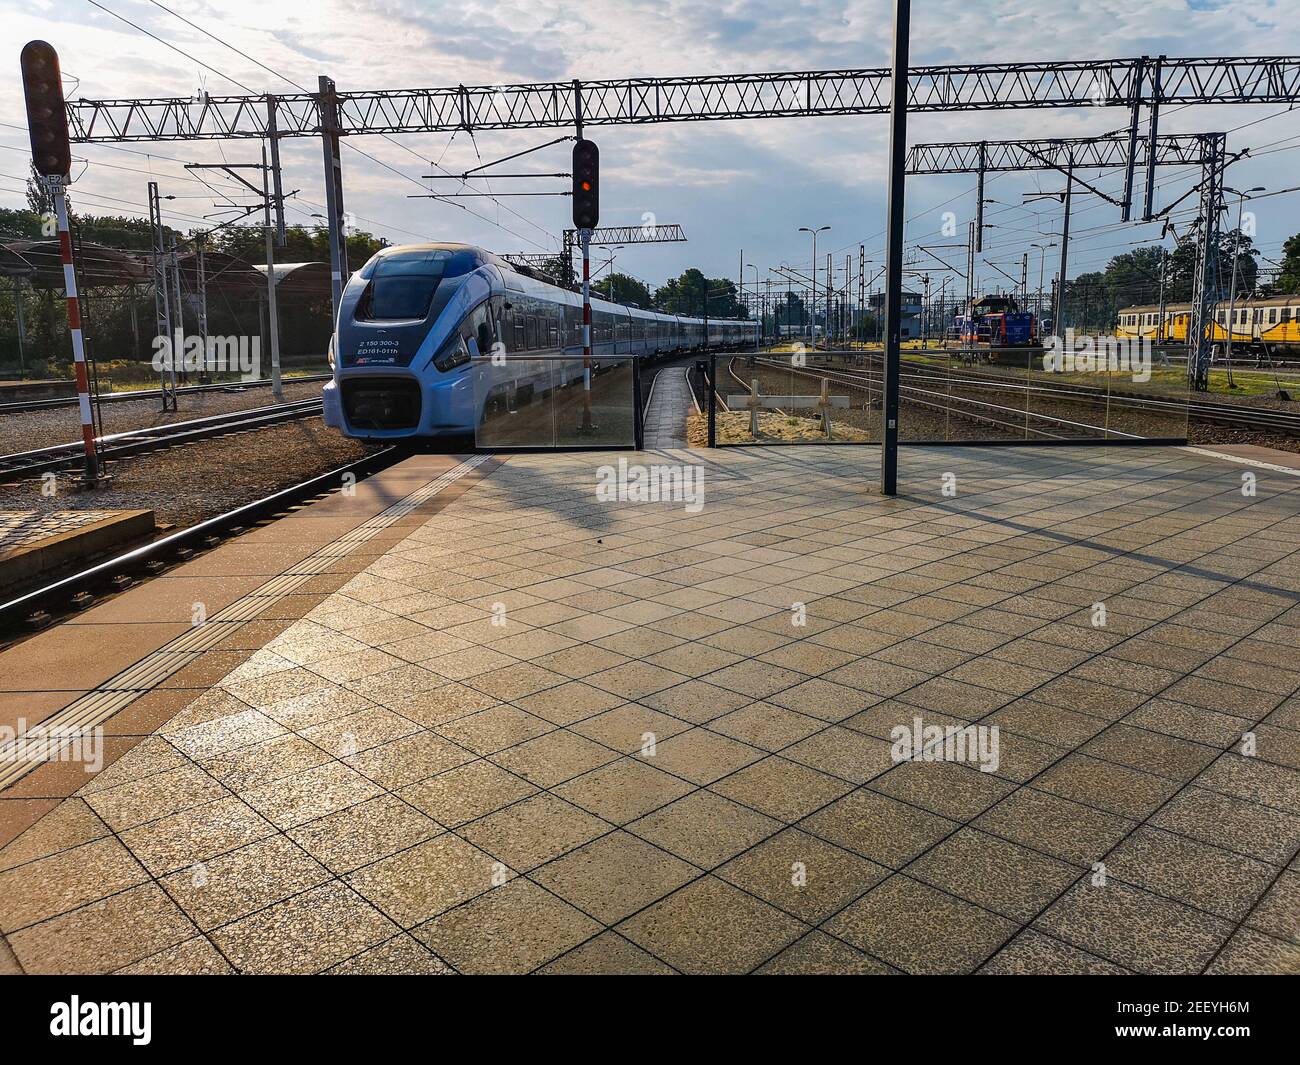 Wroclaw June 17 2018 train arrives to platform at main train station Stock Photo